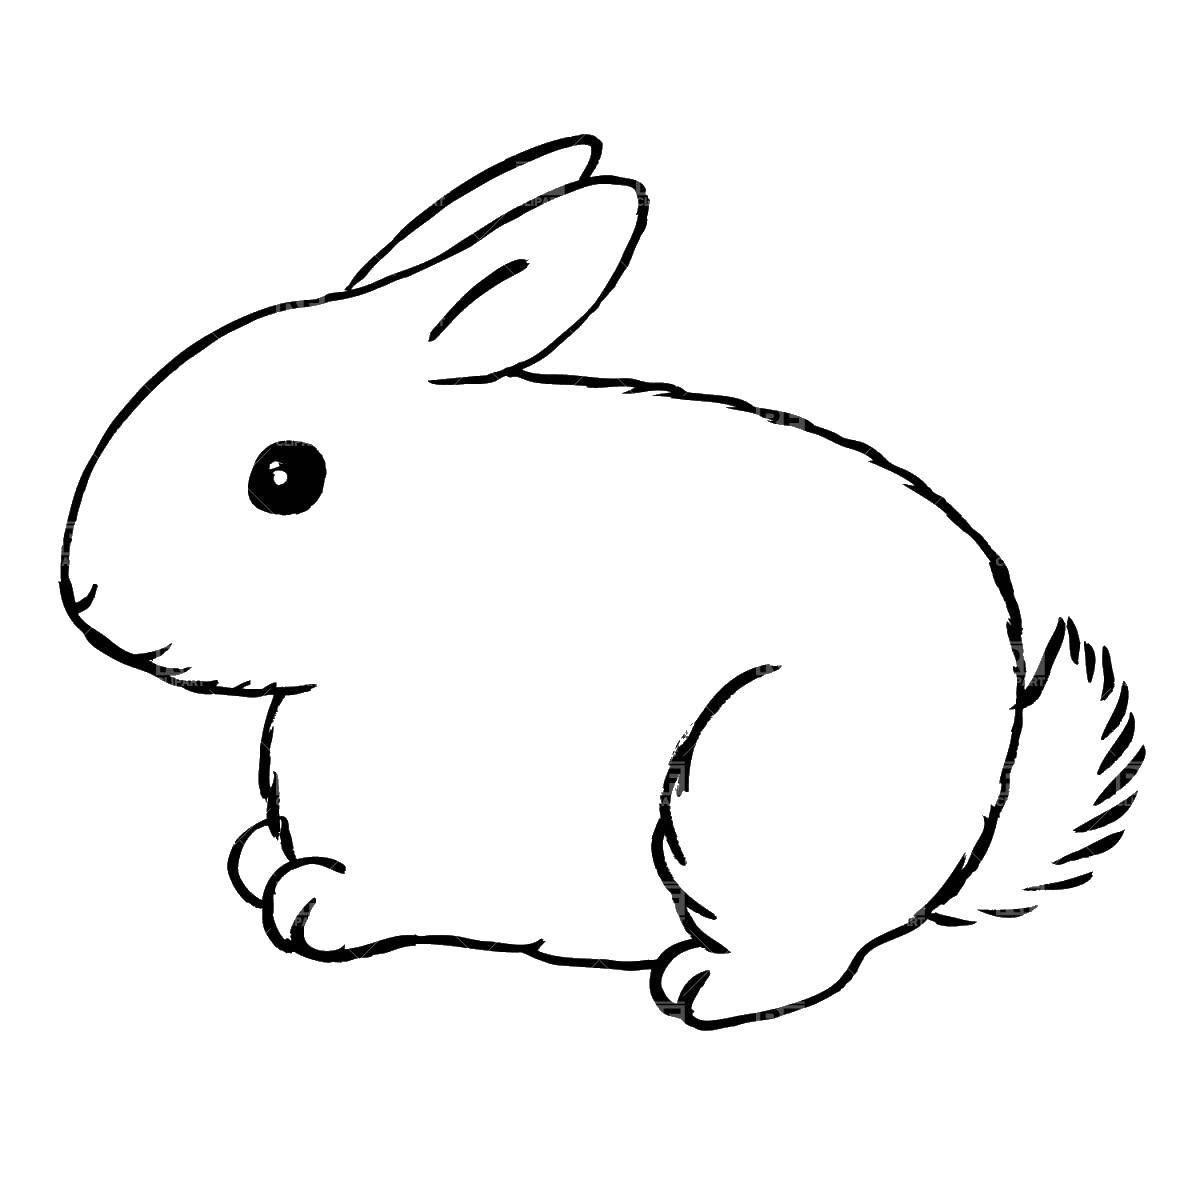 Coloring Bunny. Category Animals. Tags:  hare, rabbit, animals.